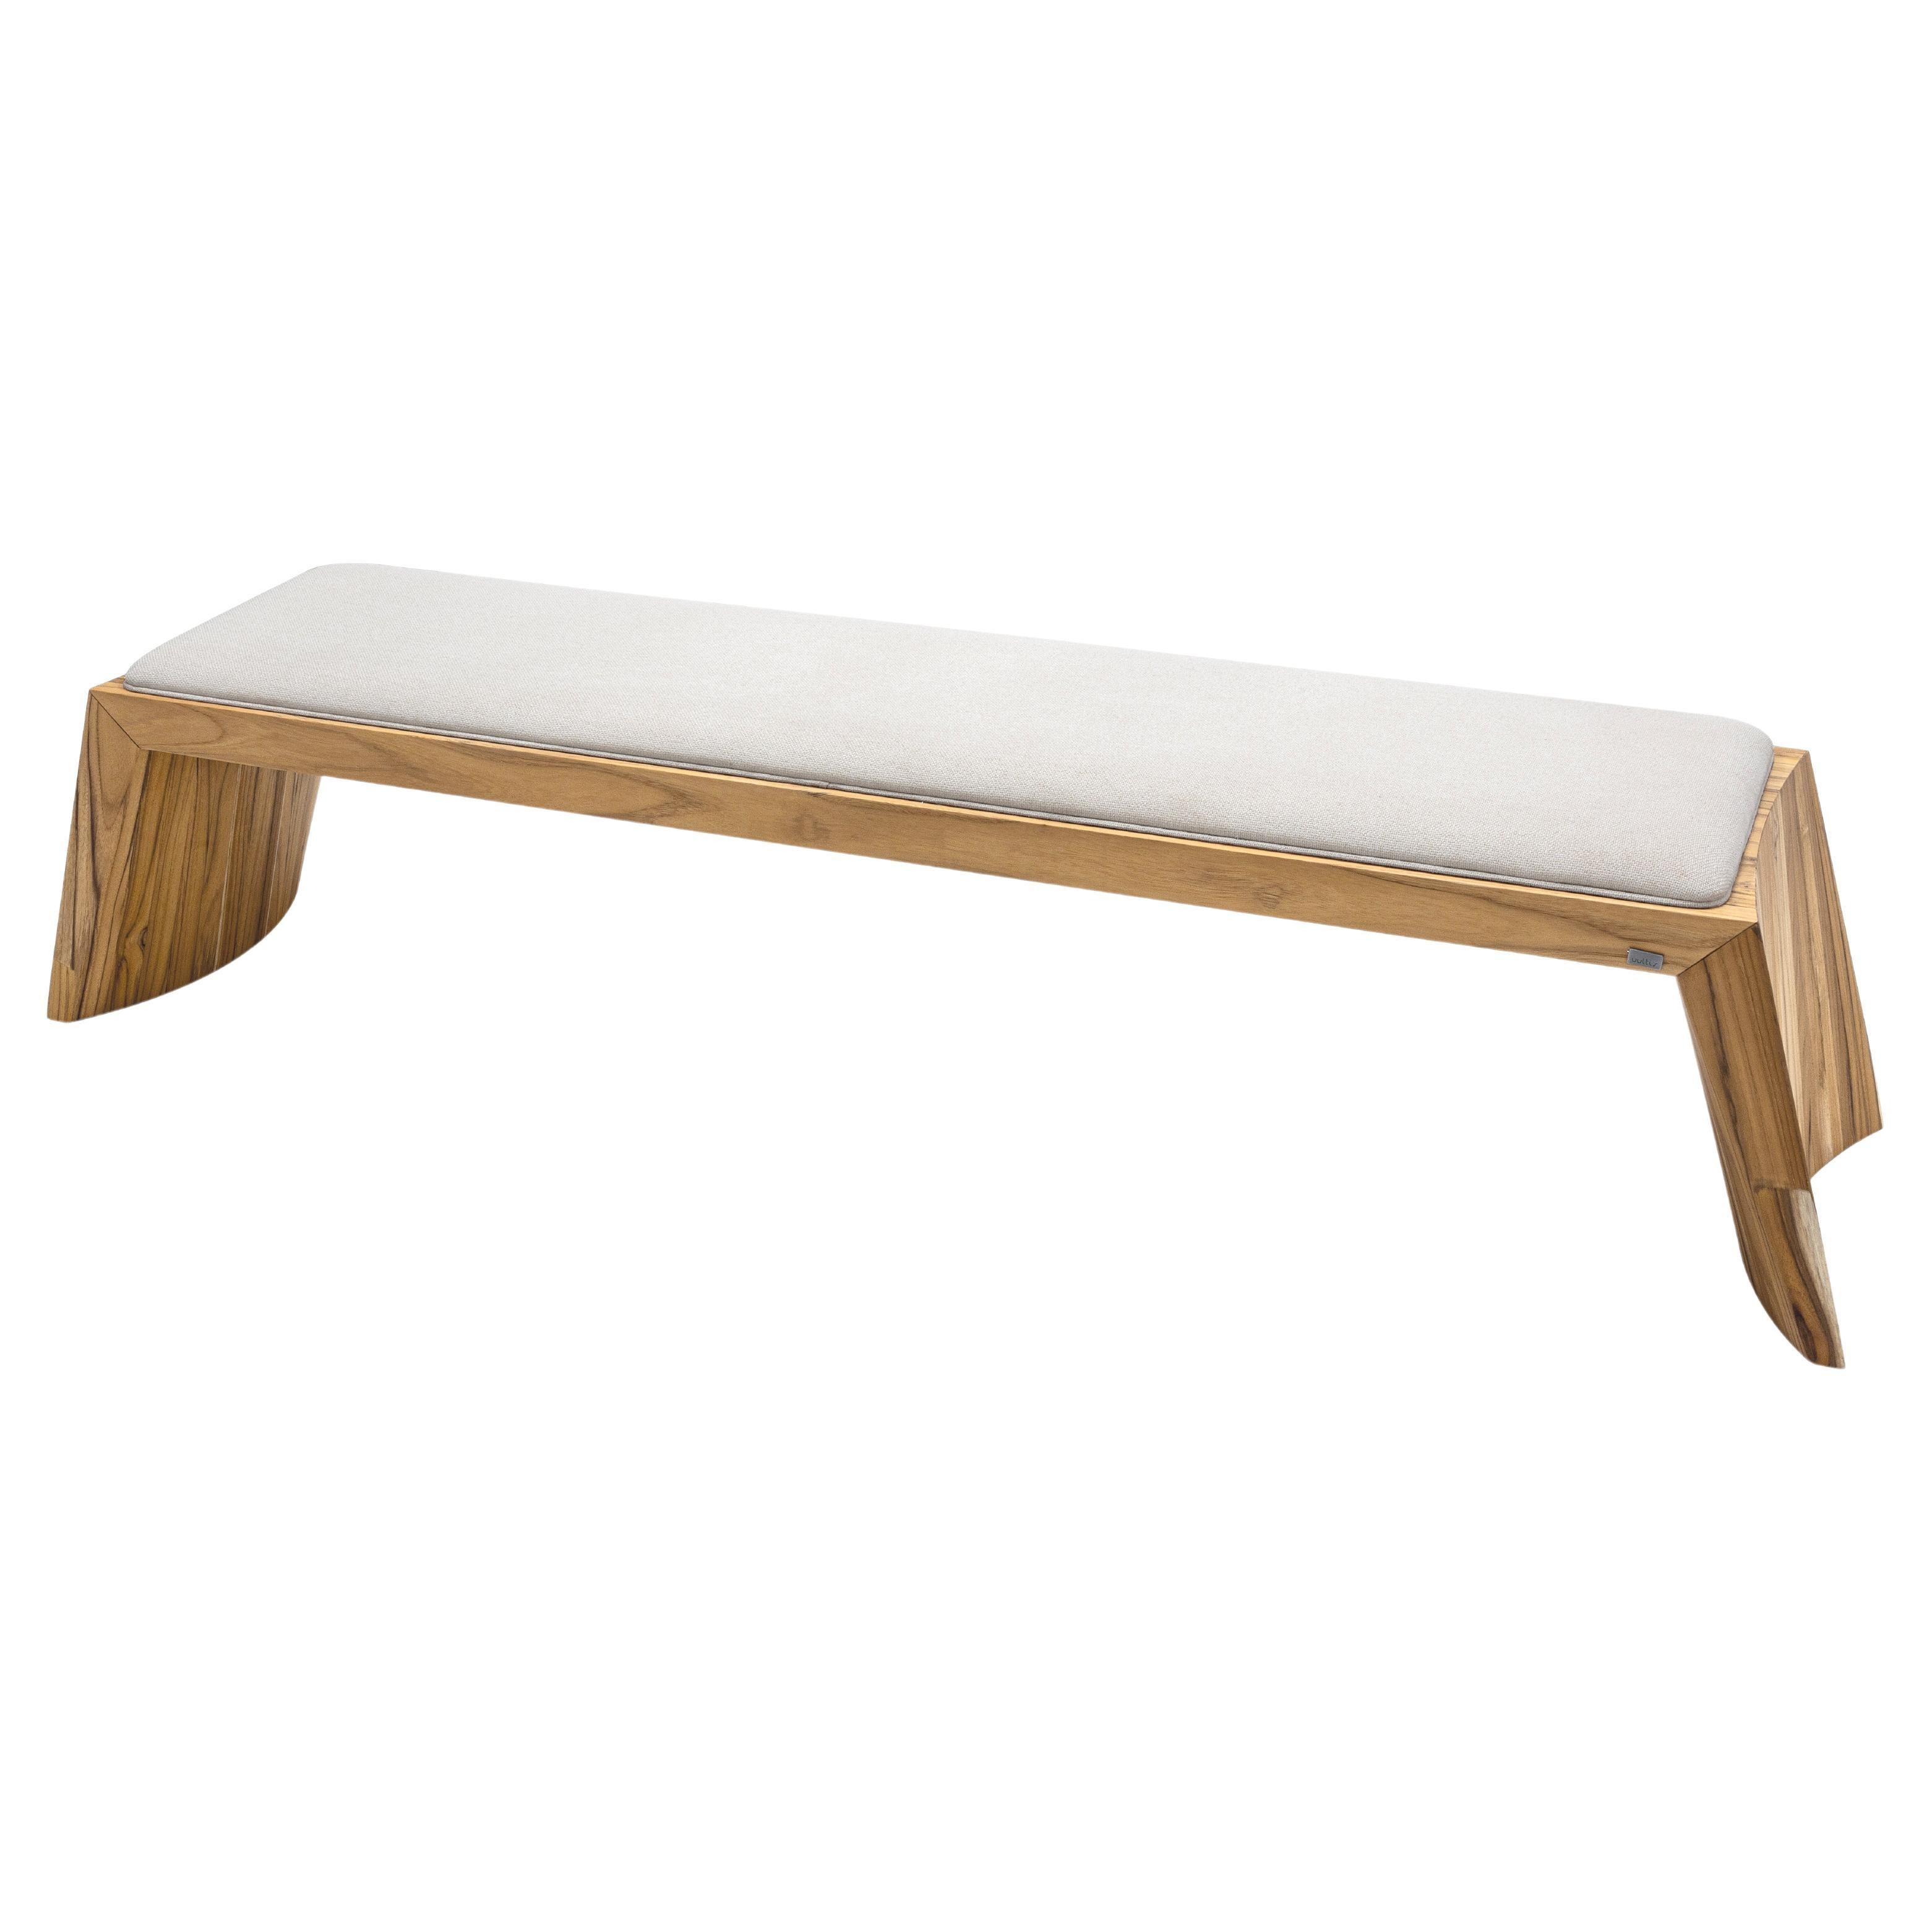 Trapezio Bench 4 Seats in Teak Wood Finish and Beige Fabric